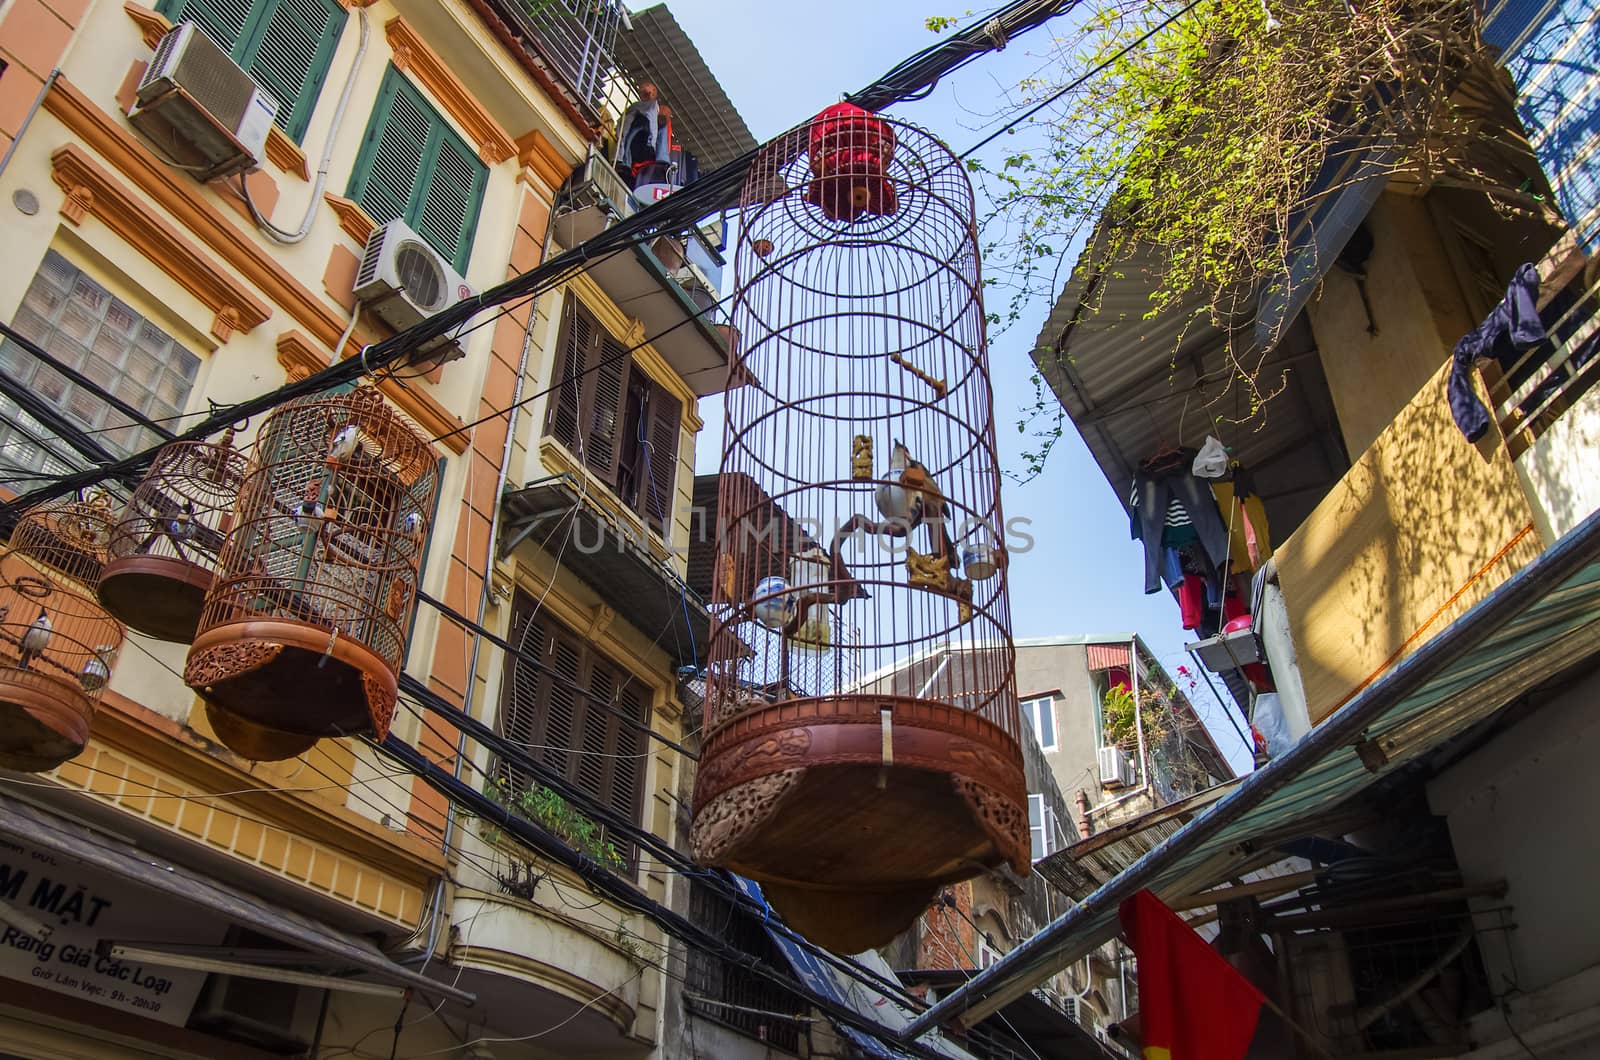 Birds in the cages in streets Hanoi old quarter. Vietnam